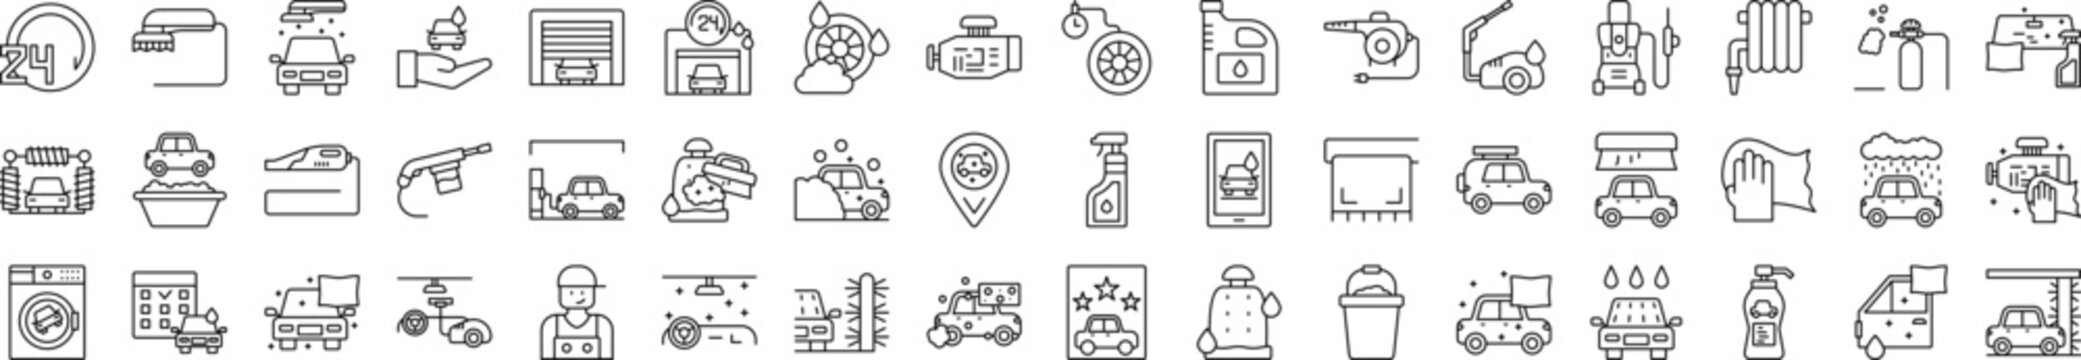 Car wash icons collection vector illustration design